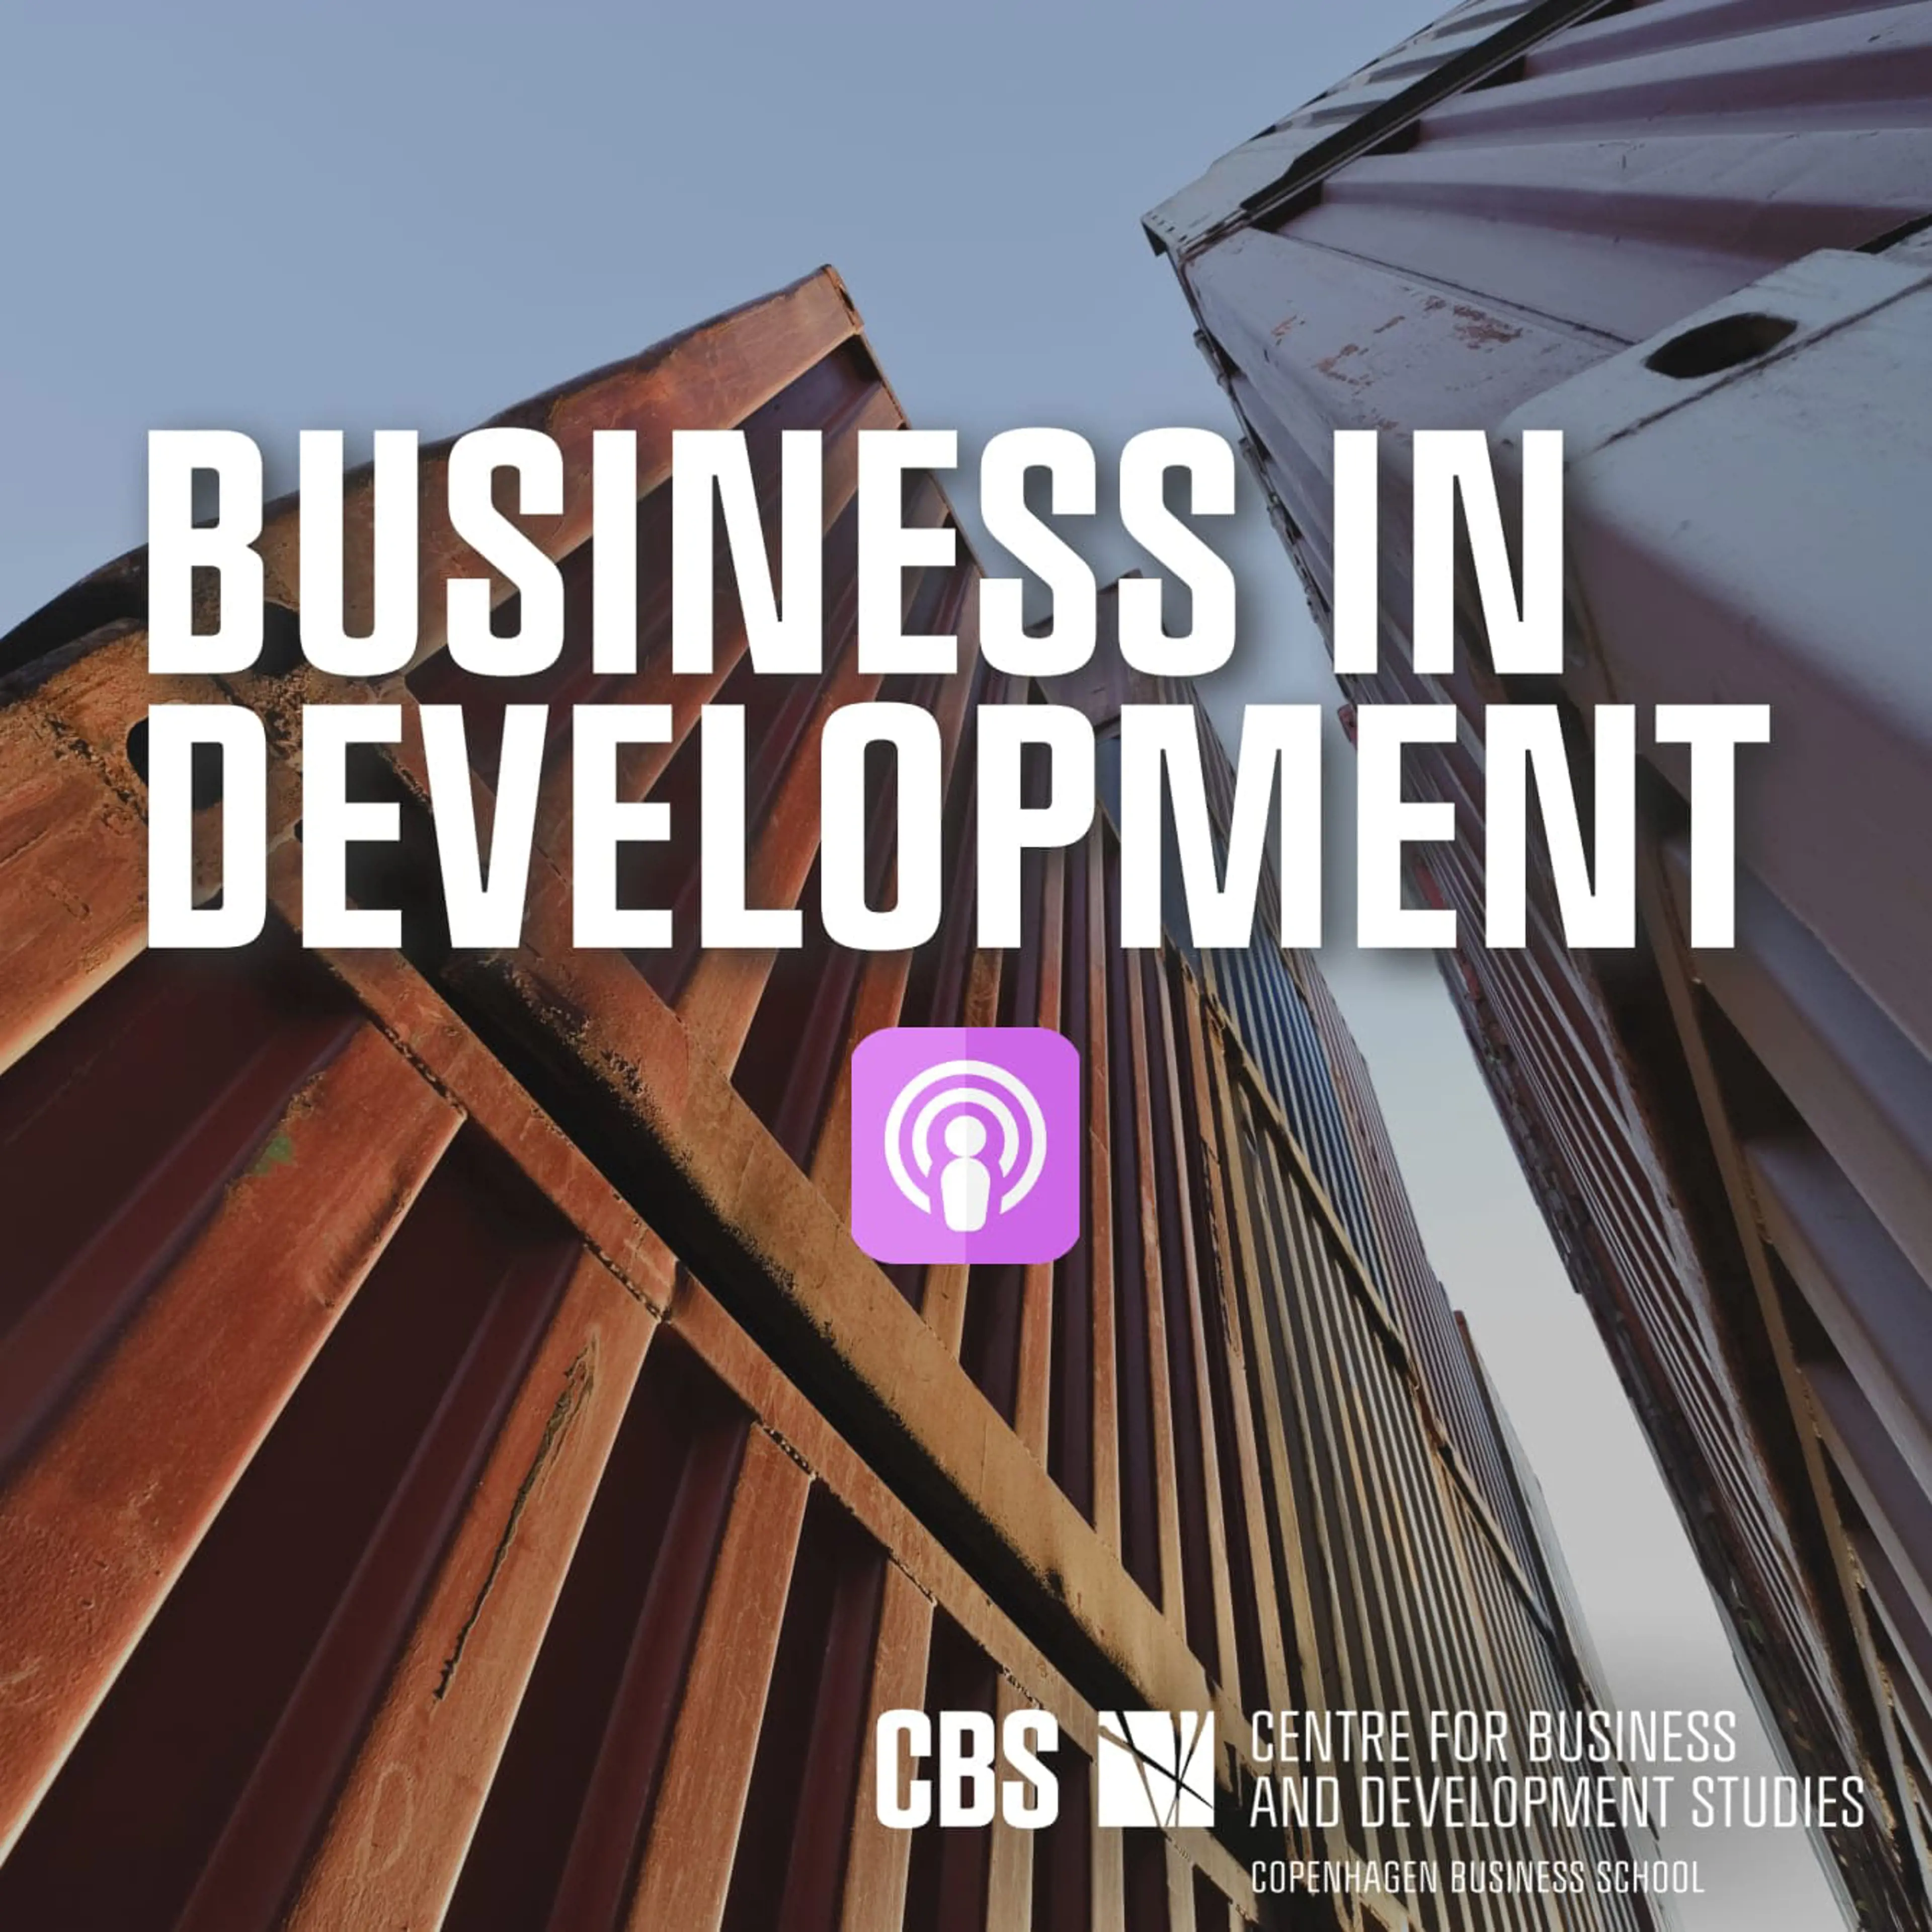 CBS centre for business and development studies